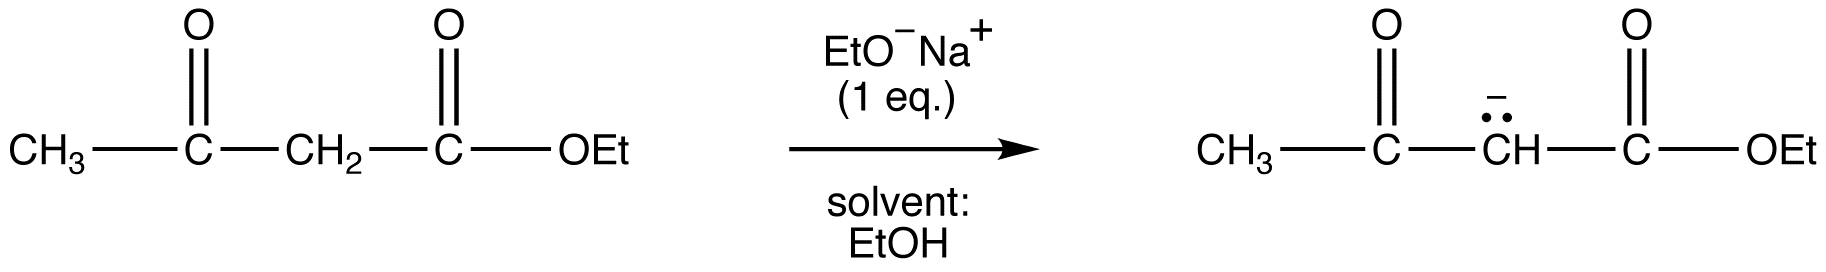 acetoaceticestersynthesis4.png